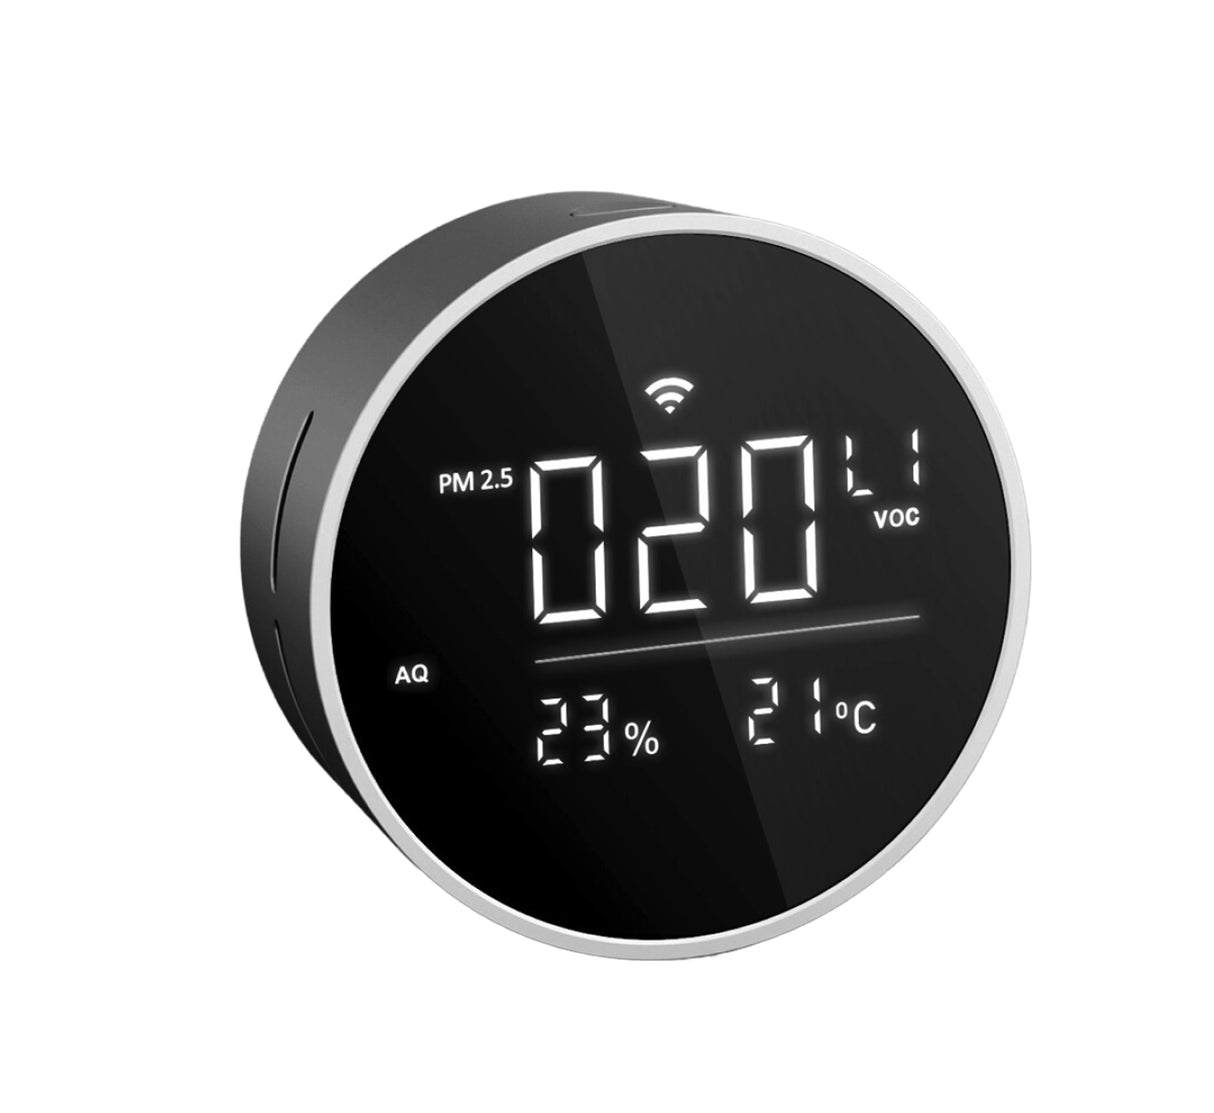 AIRBOT Z1 Air Quality Monitor (1 piece)